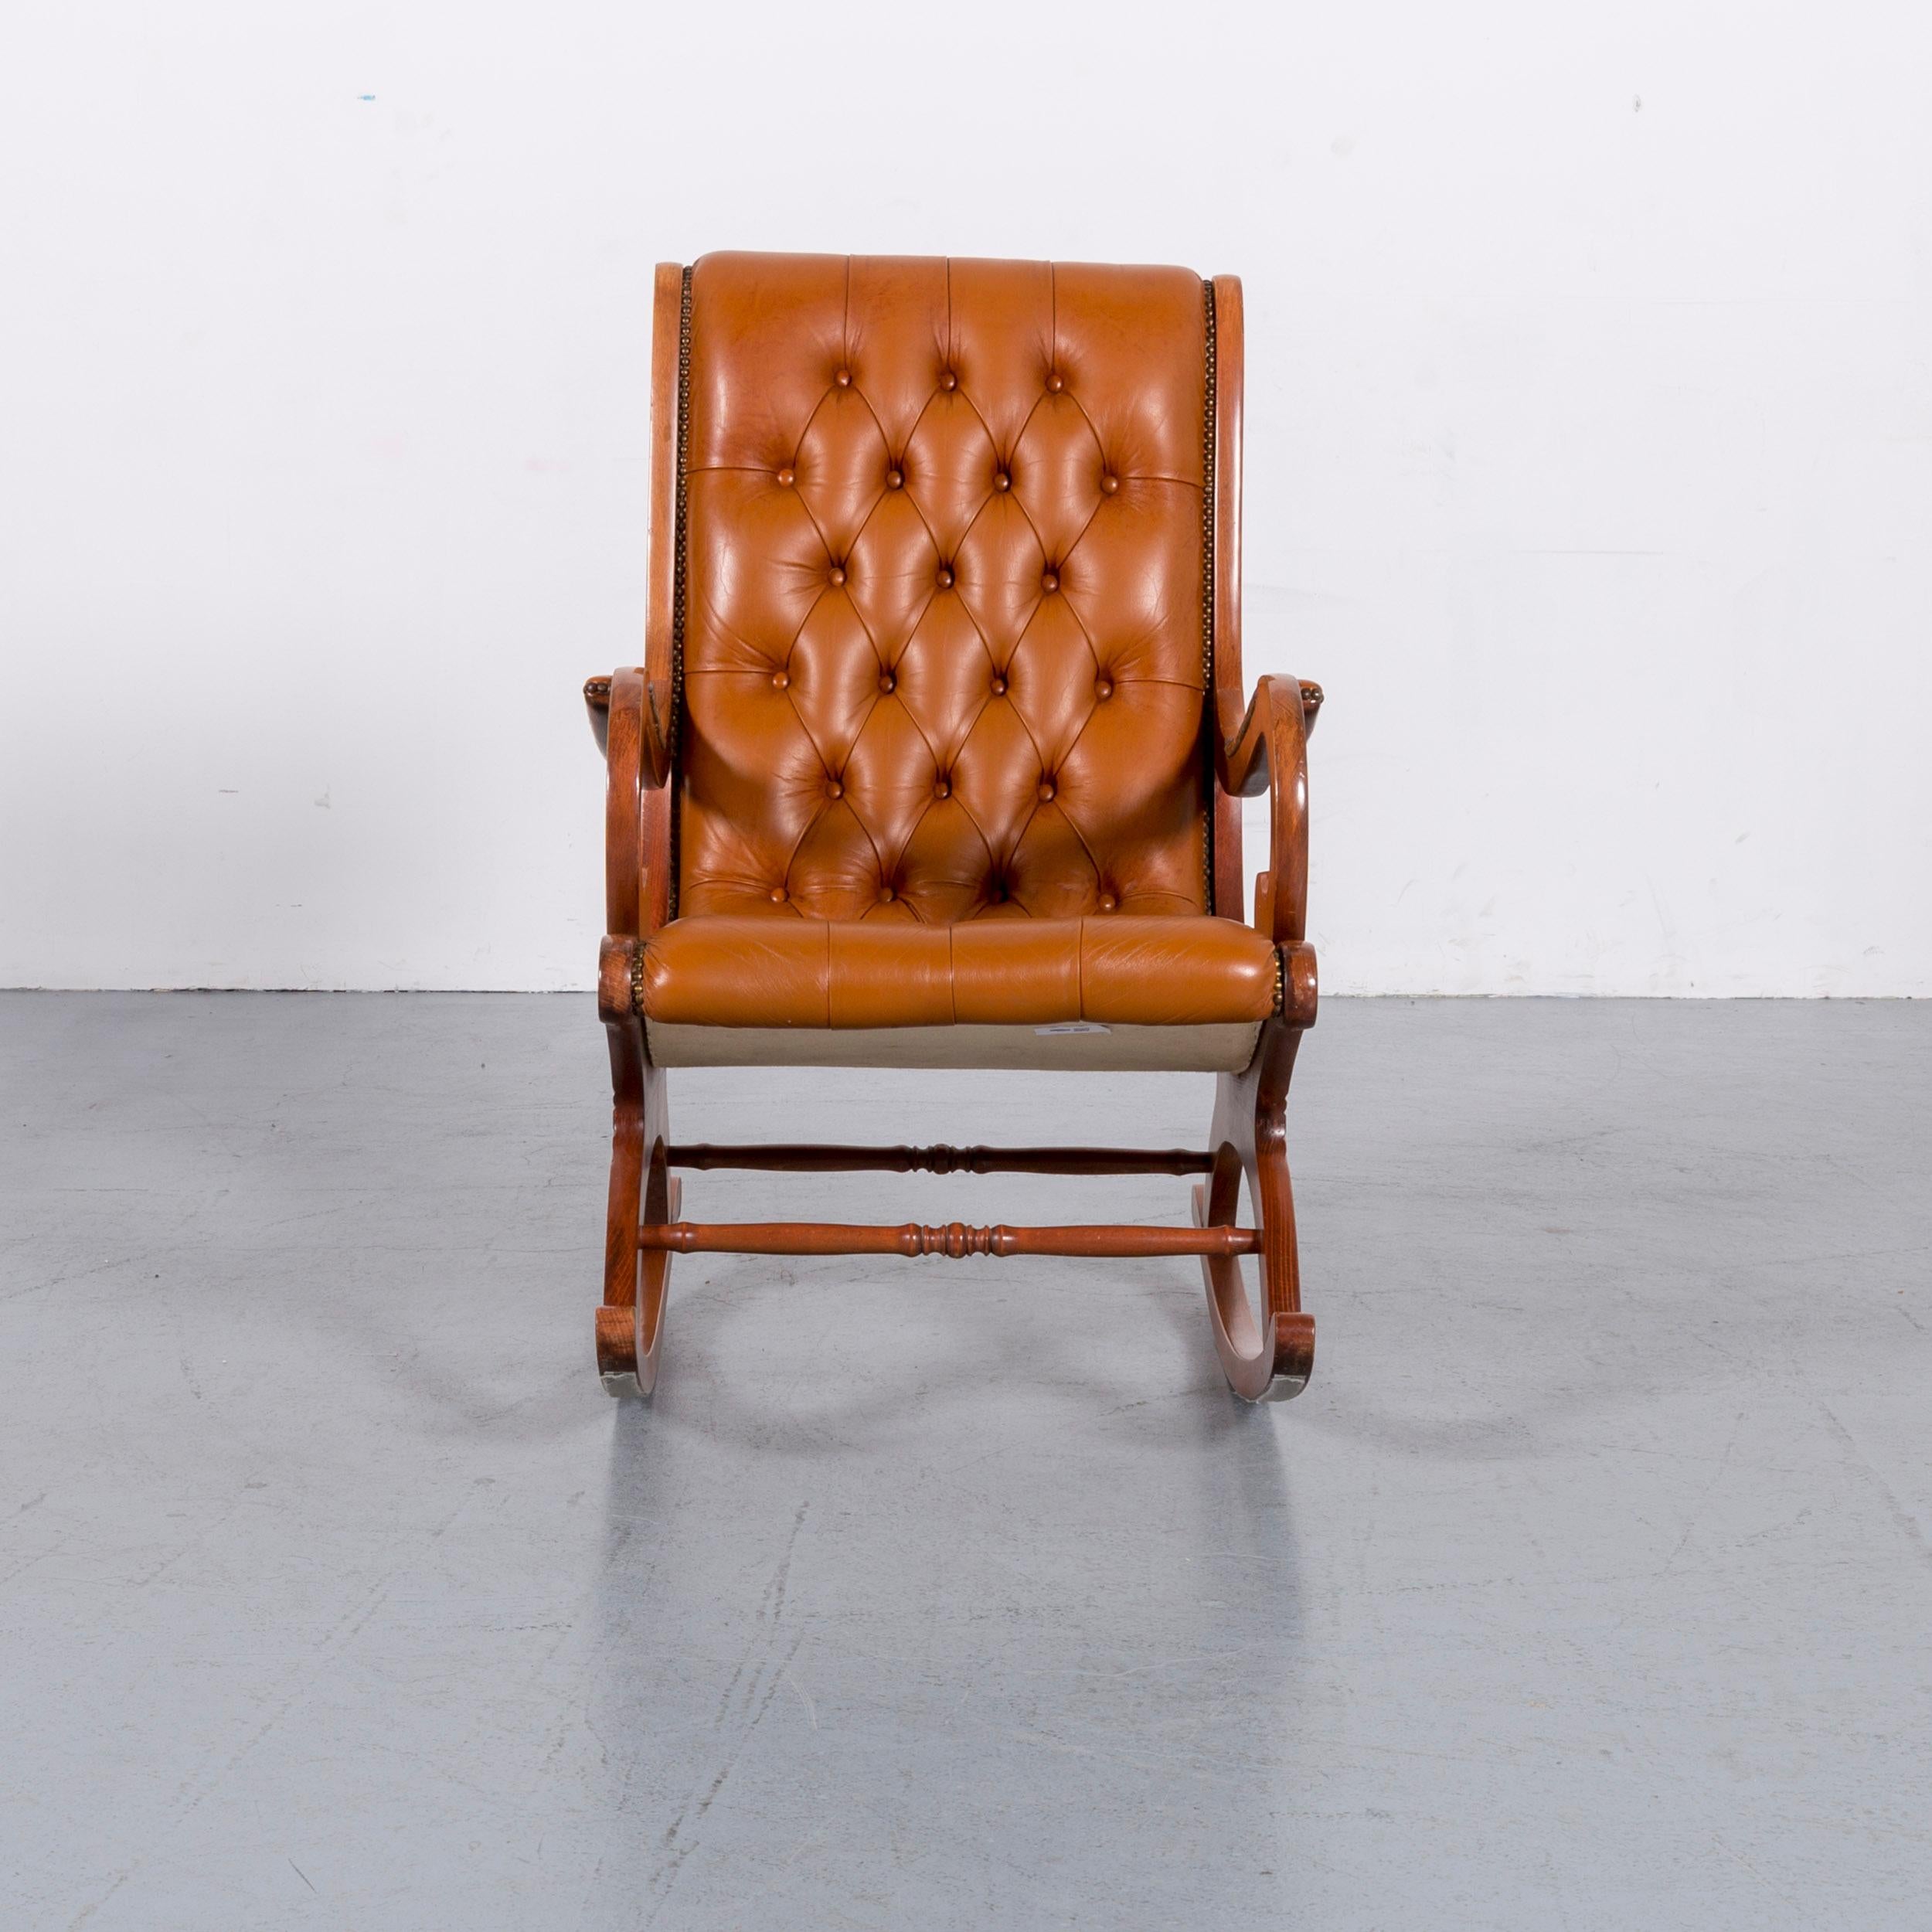 We bring to you an Chesterfield leather rocking chair brown cognac one-seat vintage retro.



























































 